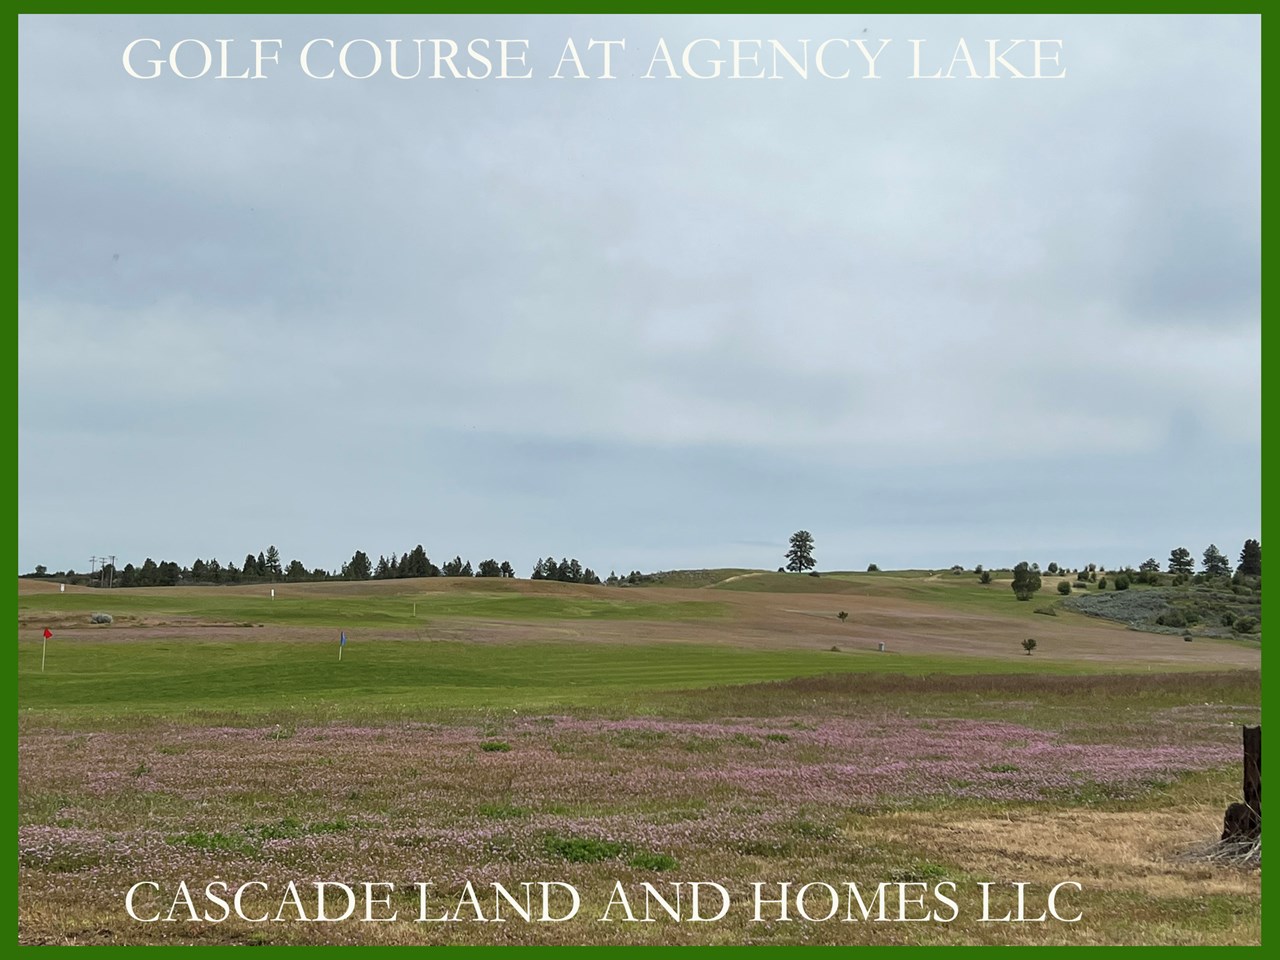 the dmolo golf facility at agency lake is just down the road, only a few minutes away from the property. if golf isn't your thing, there are hiking trails nearby, and many places to horseback ride, mountain bike, or just stroll through the countryside.